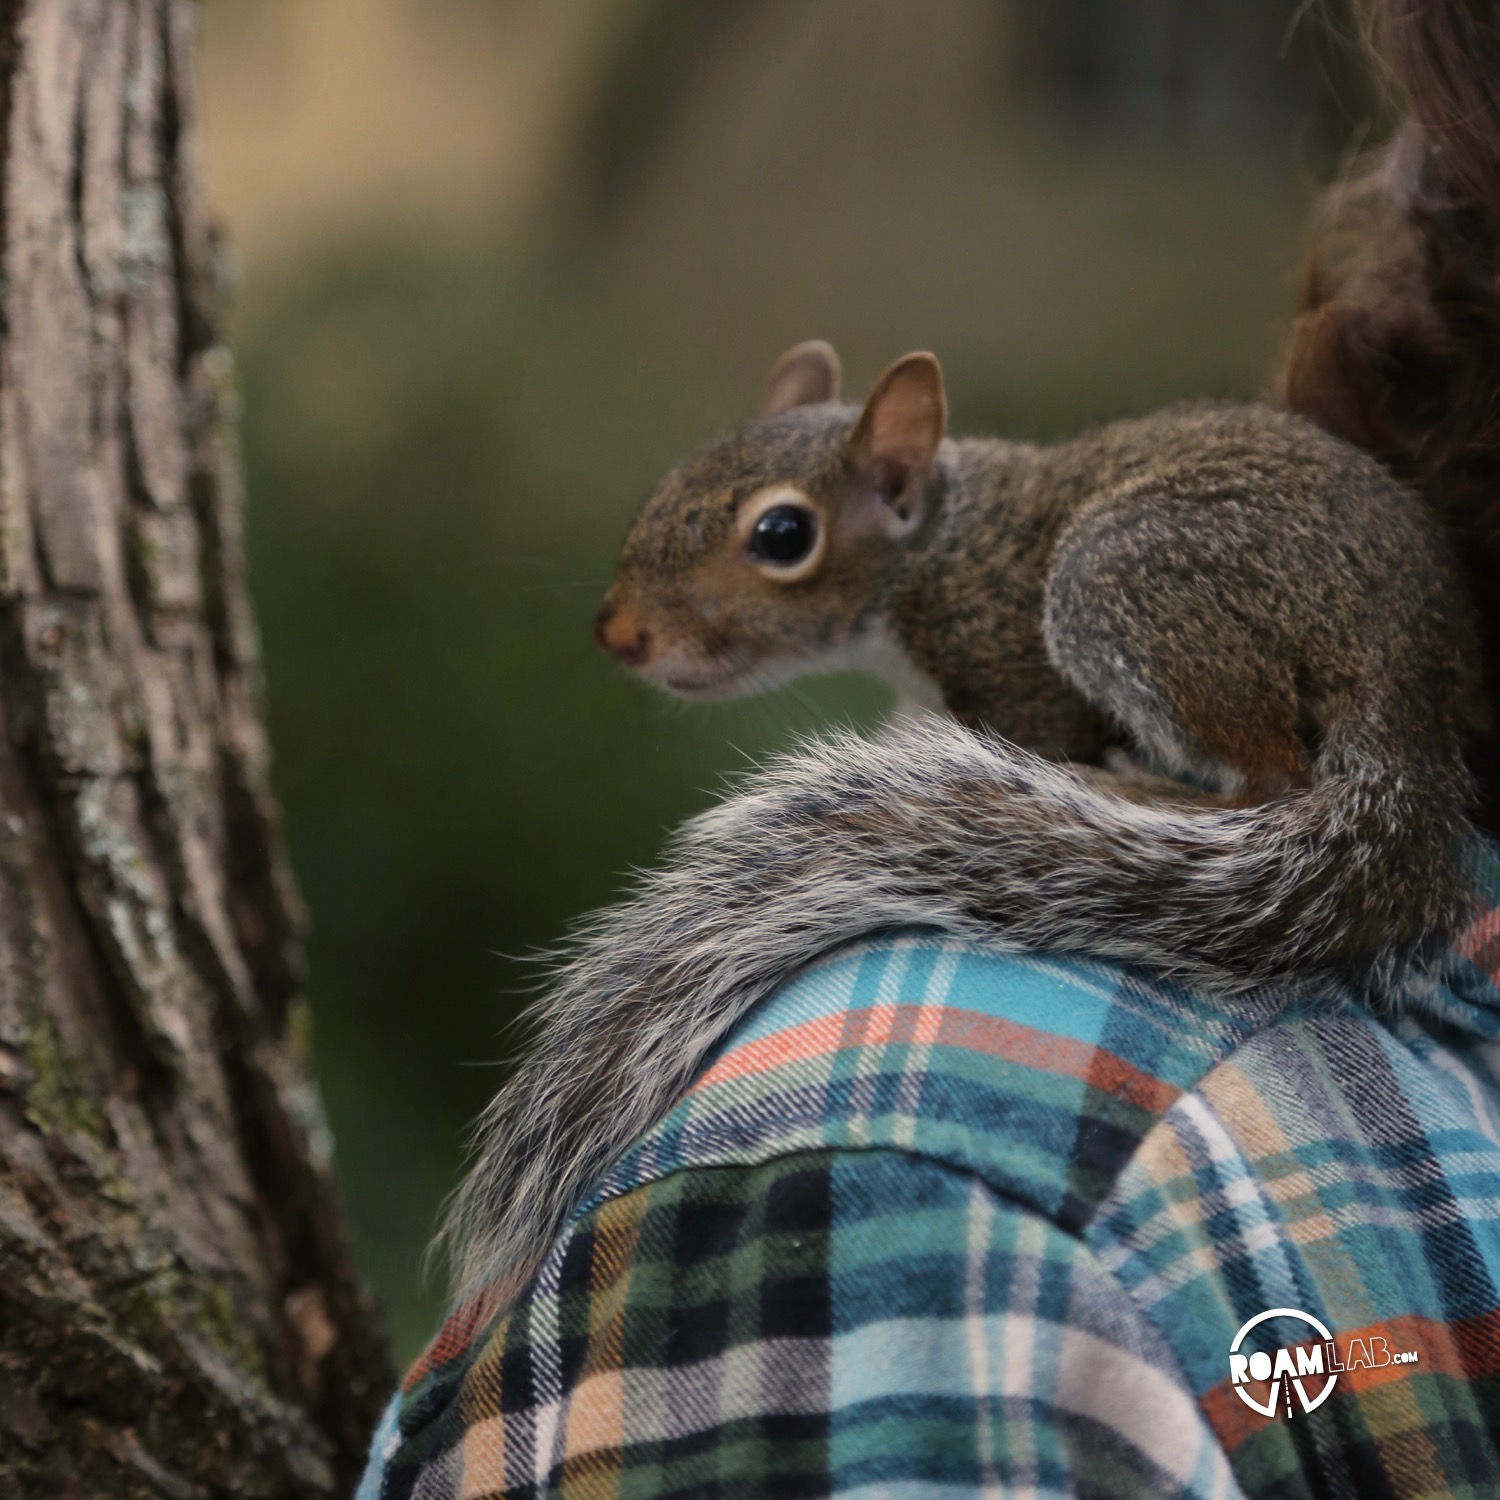 A lot of people have asked us about how we got so close to the cute couple of squirrels that have been showing up a lot on our Instagram Feed. In this 5 step series, I'll tell the tale of Tenzing, Hillary, Cowboy, and myself and the rollercoaster of experiences from rehabilitation to release.